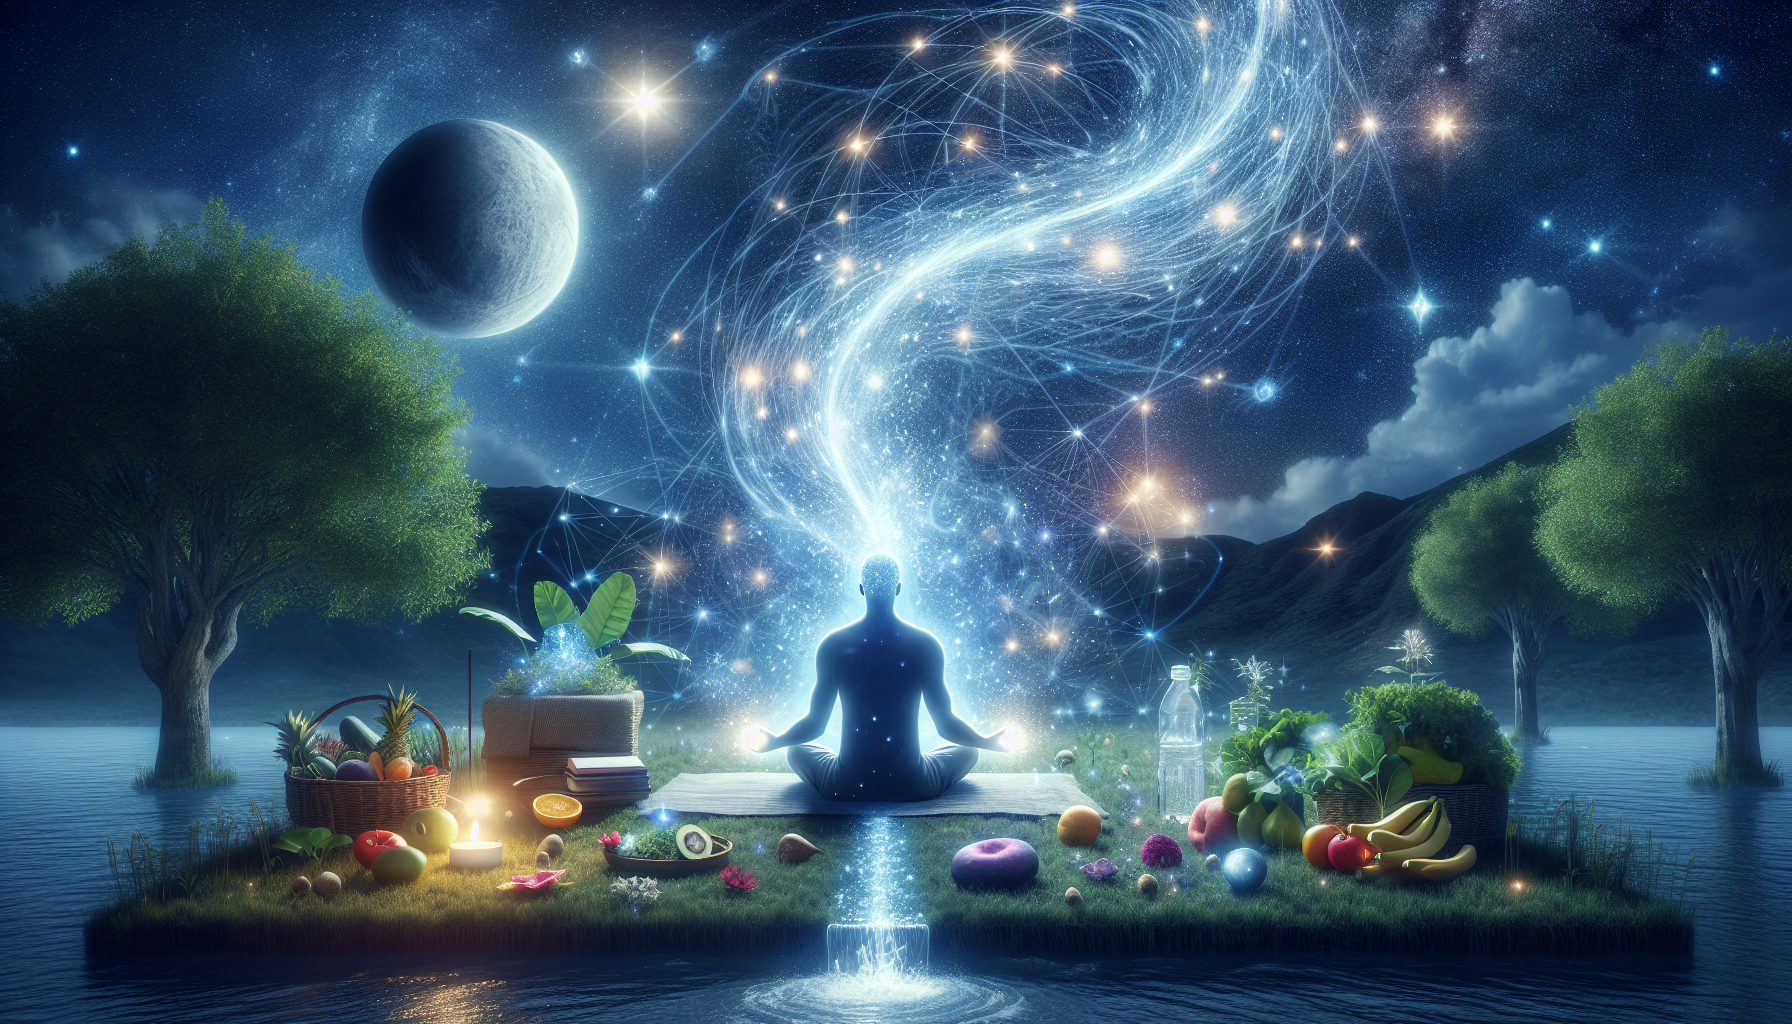 A concept visualisation demonstrating the Law of Attraction enabling wellness. The scene features an ethereal energy flow from the universe, represented by stars and cosmic energy, into a serene individual practicing meditation. The wellness manifests in the form of glowing light energy stream, symbolising positive thoughts and emotions, flowing from the universe into the person. Around the person, symbols of health and vitality, like fruits, vegetables, and fresh water, appear to further signify wellness. The setting is tranquil, perhaps a serene garden under a clear night sky.